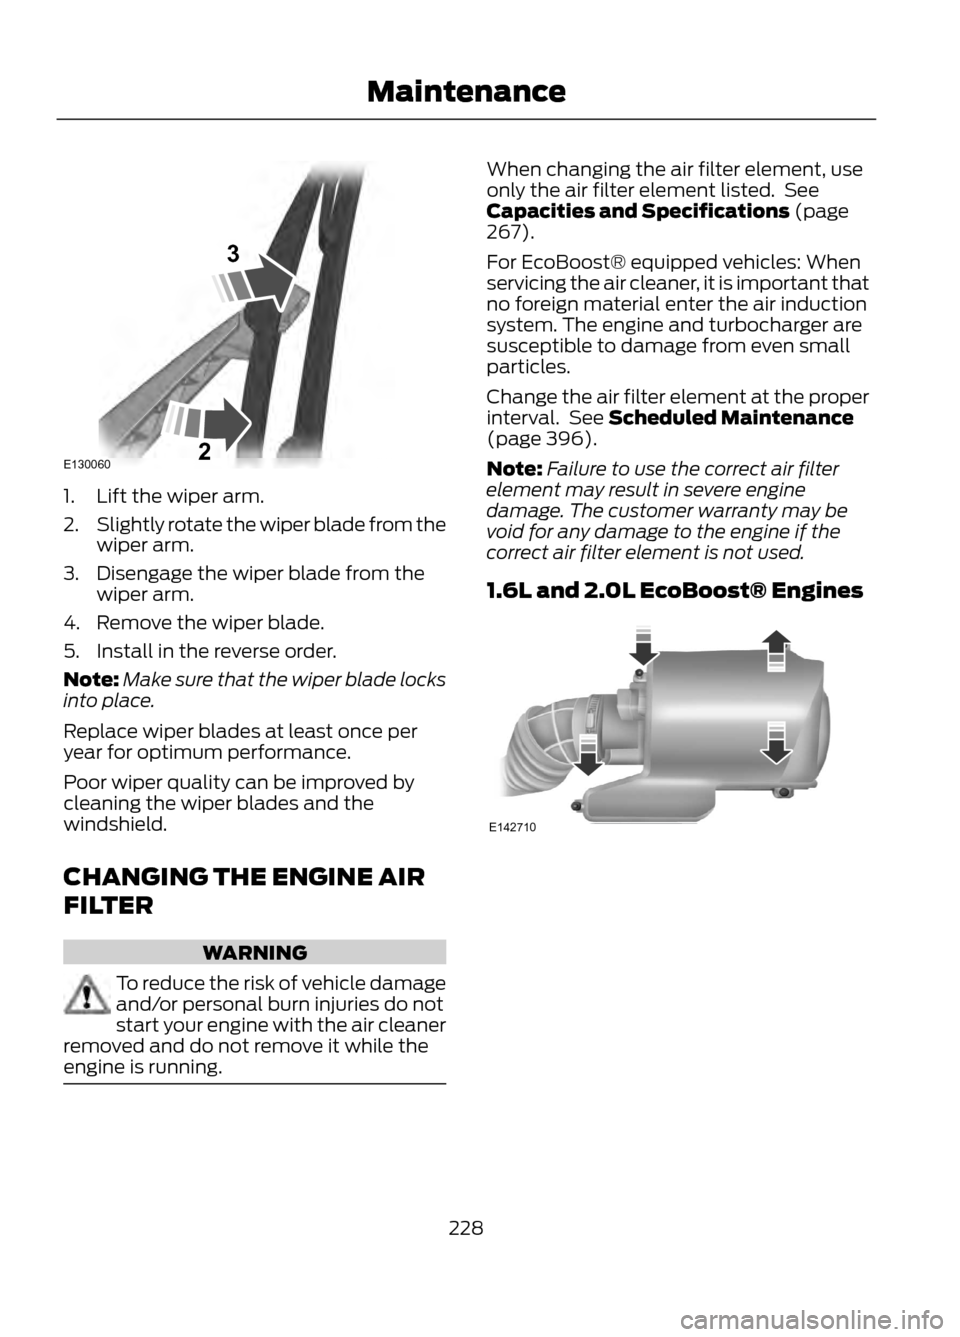 FORD ESCAPE 2013 3.G Owners Manual 1. Lift the wiper arm.
2.Slightly rotate the wiper blade from the
wiper arm.
3. Disengage the wiper blade from the wiper arm.
4. Remove the wiper blade.
5. Install in the reverse order.
Note: Make sur